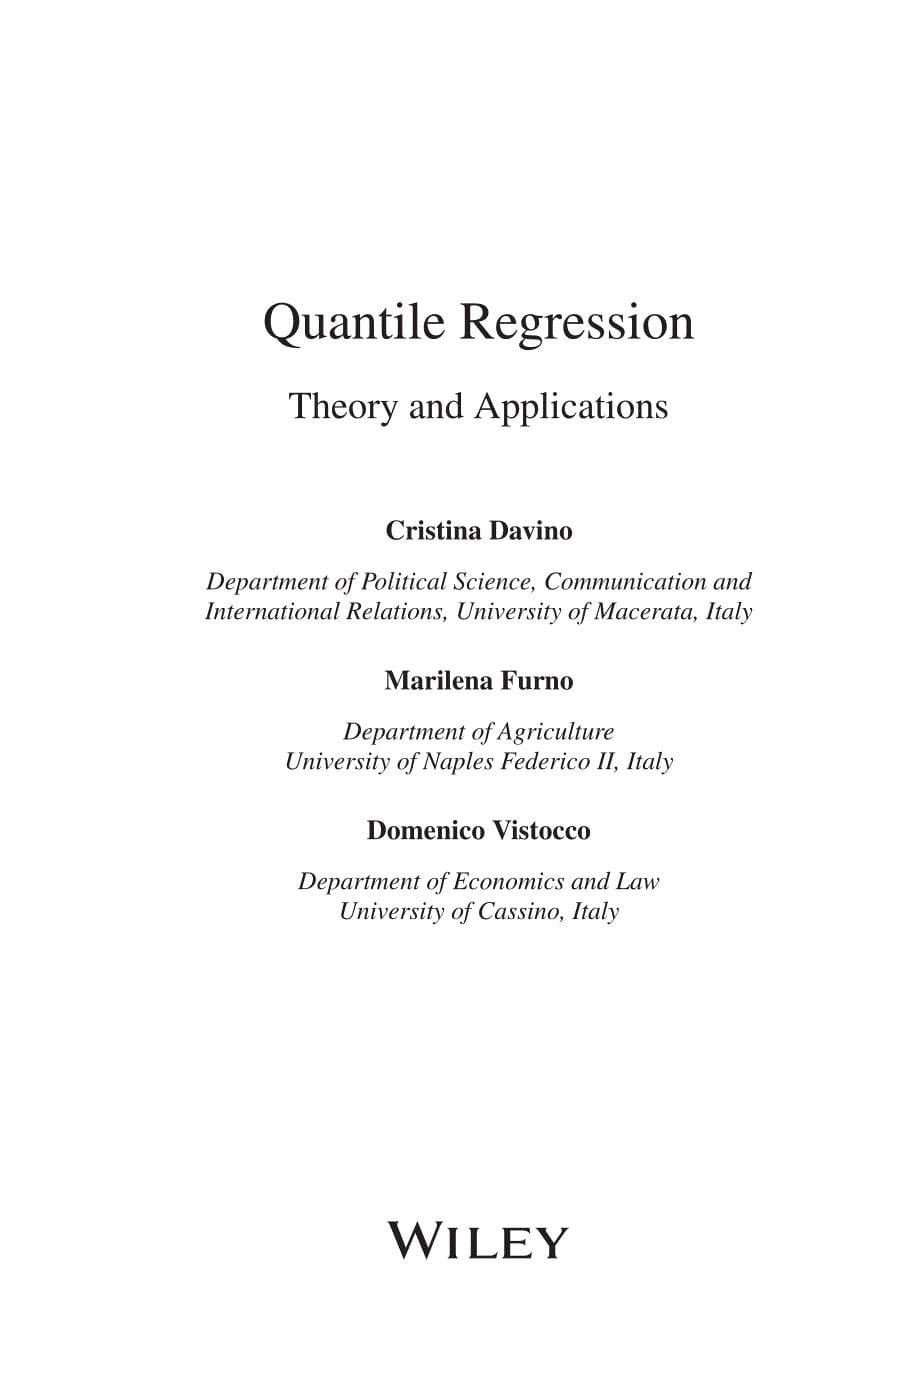 Quantile_Regression_Theory_and_Applications_第5页